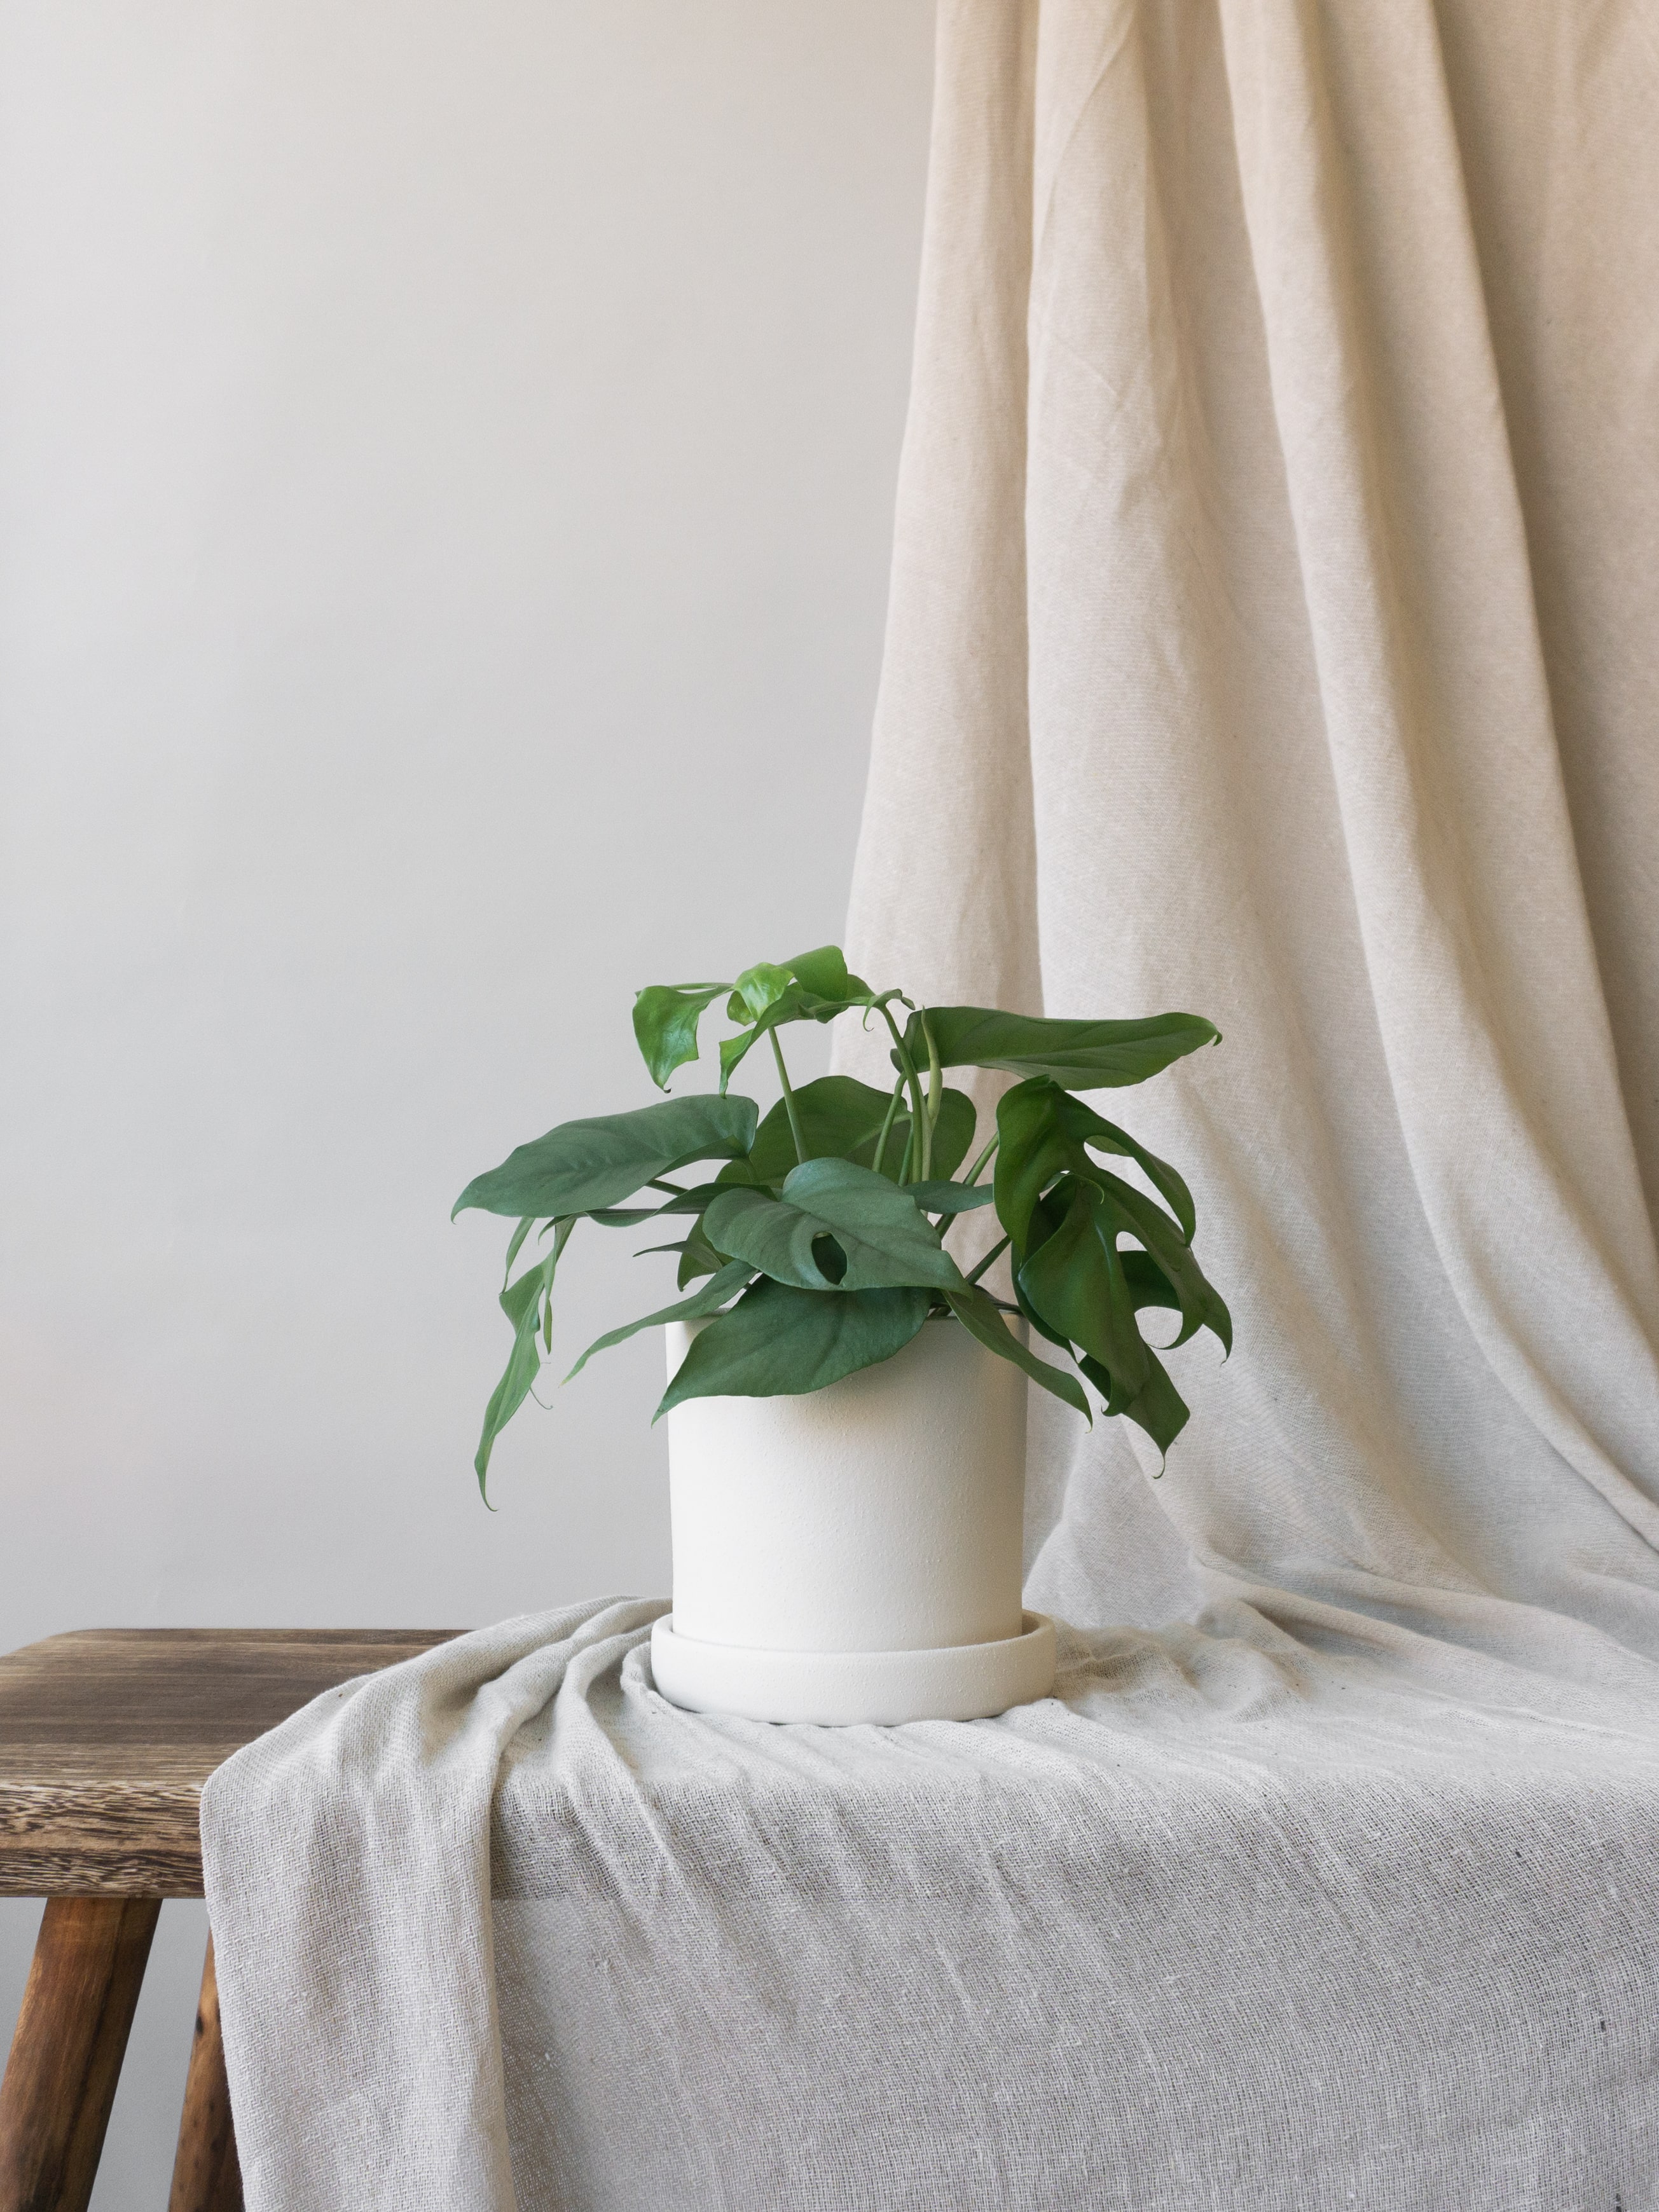 Plant care tips by Leaf Envy Mini Monstera light, watering, humidity, fertiliser requirements